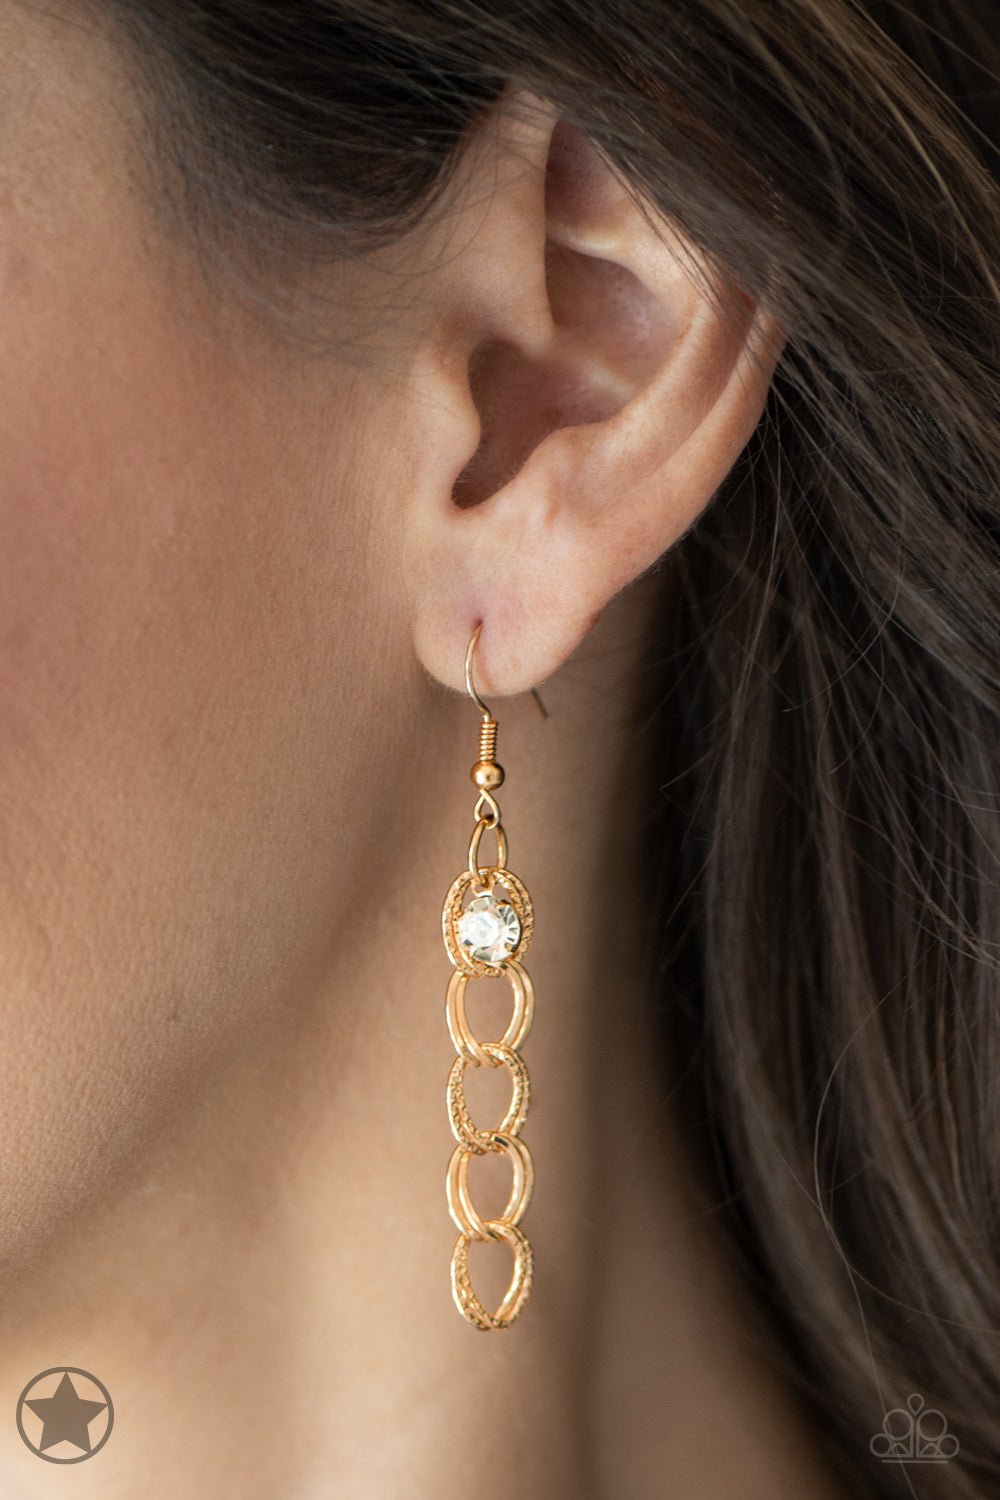 Fishing For Compliments - Gold - Bling With Crystal